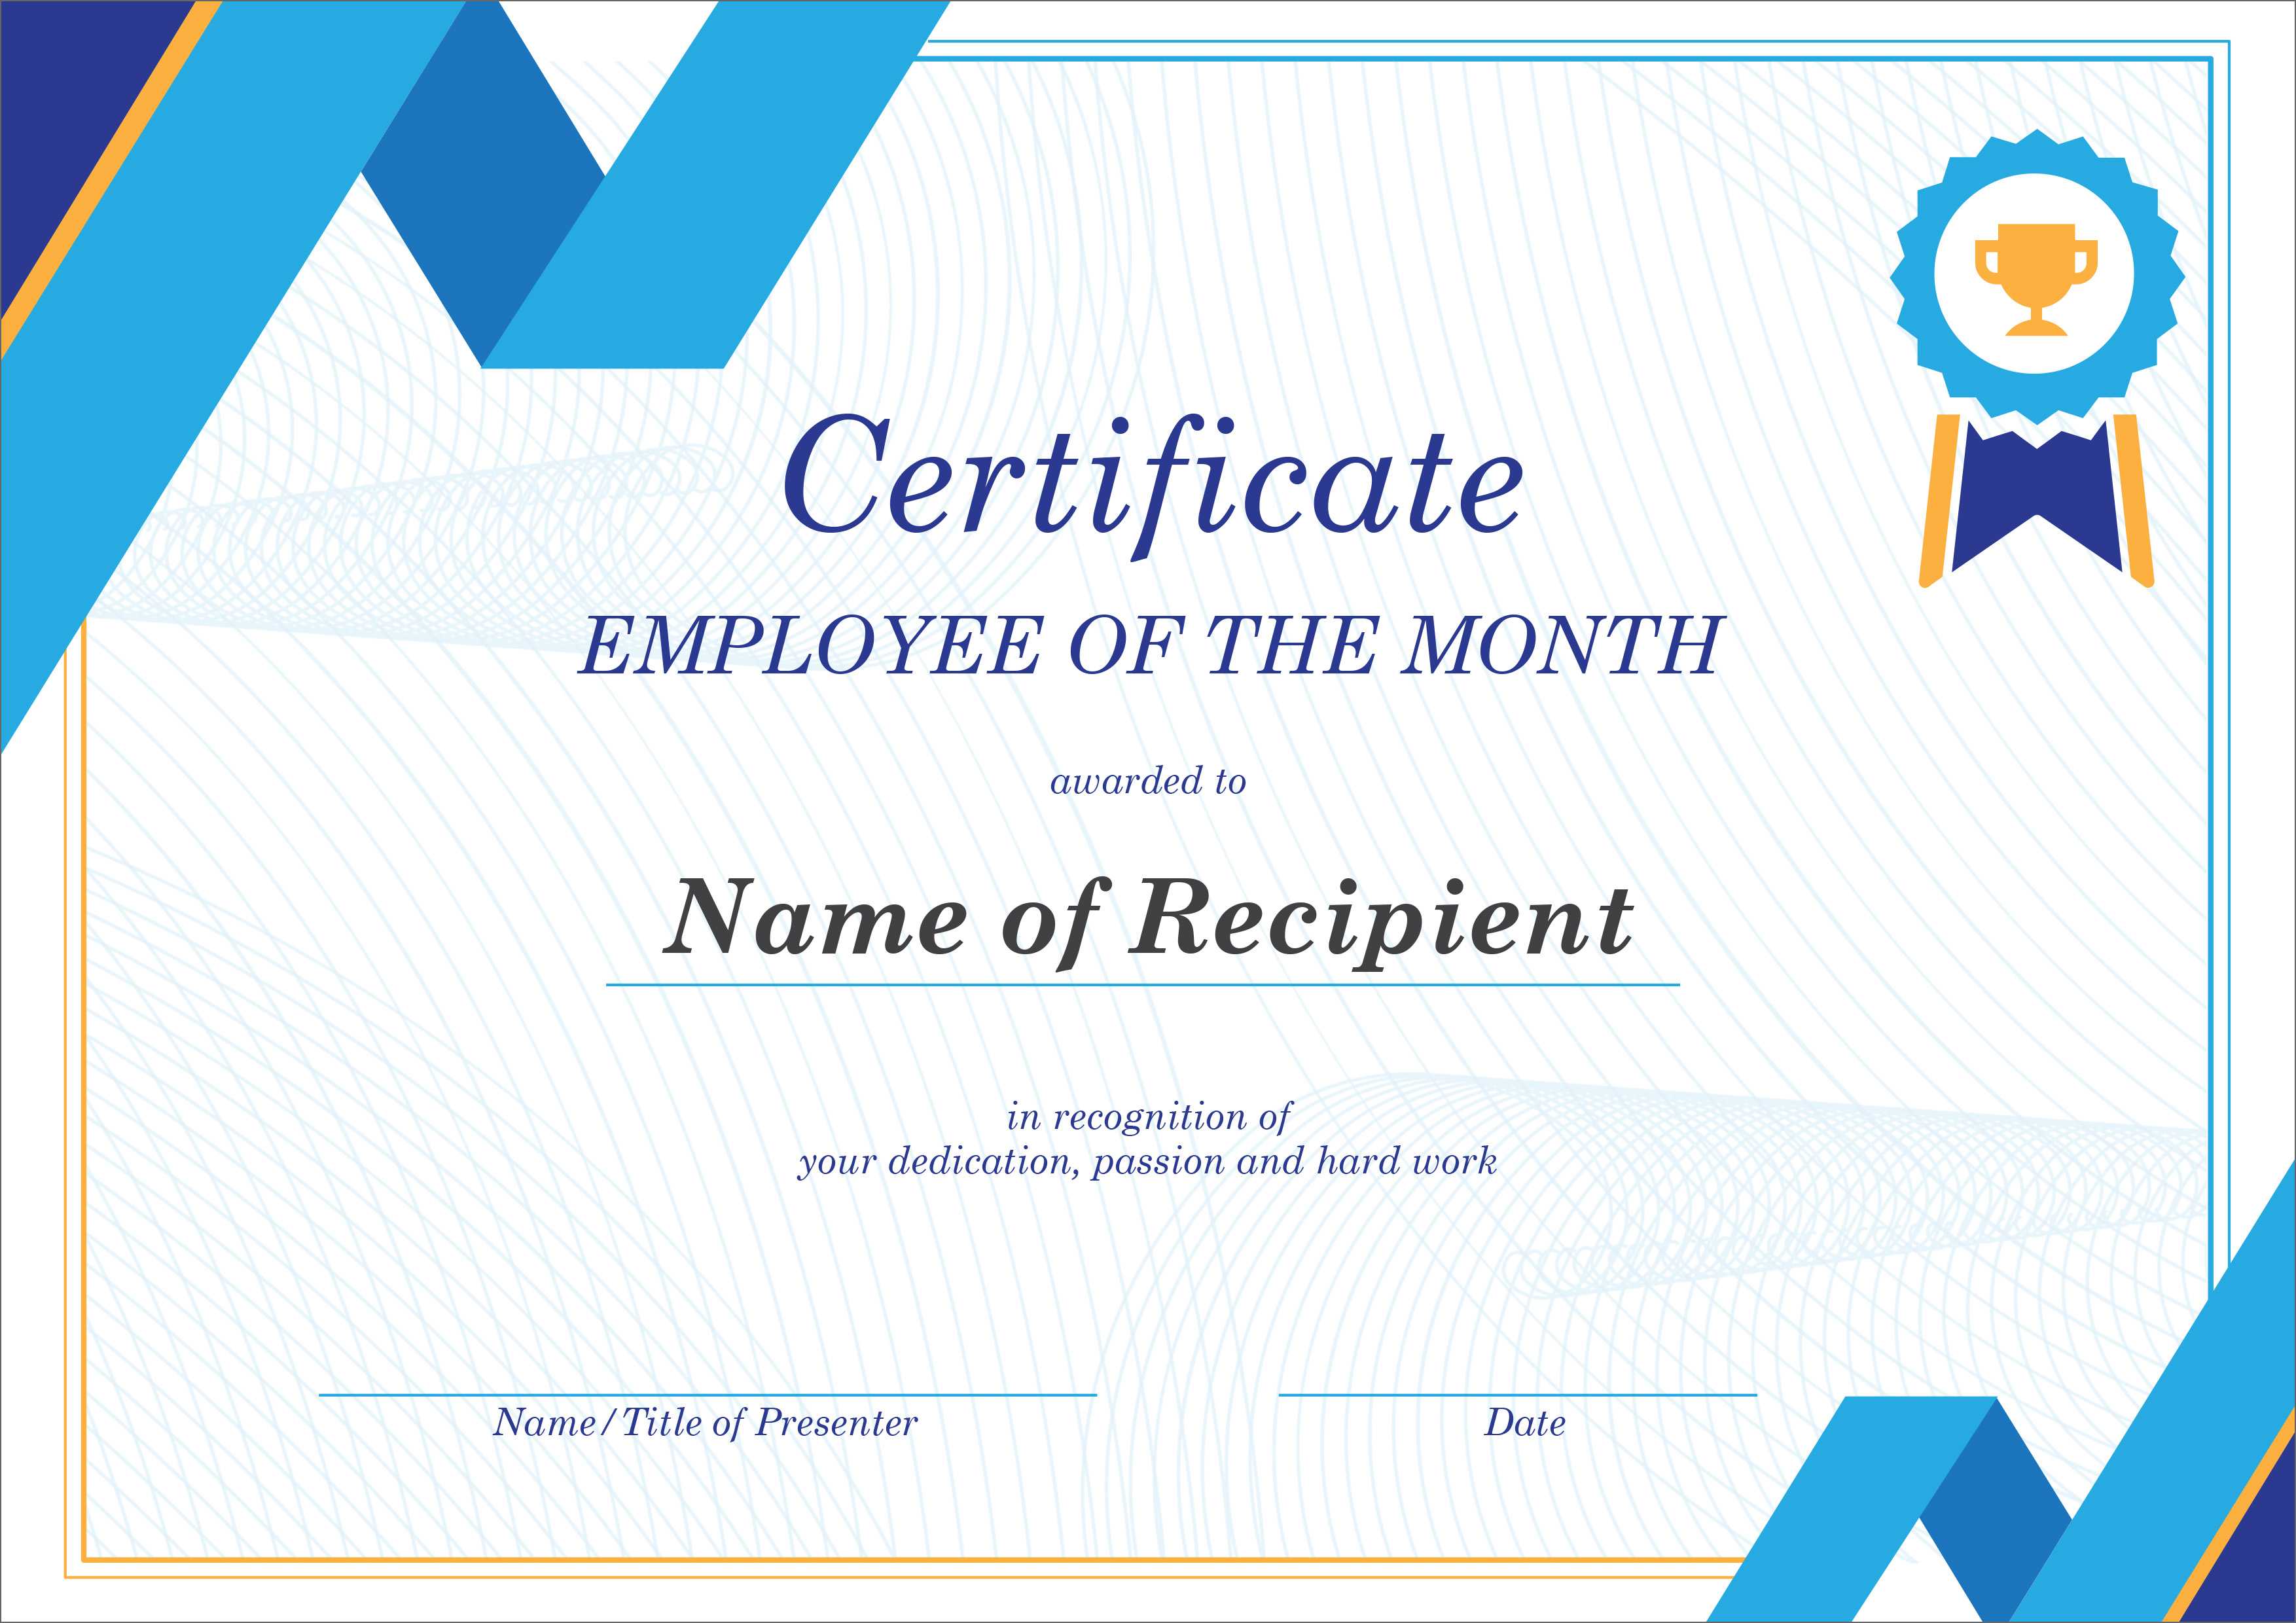 50 Creative Blank Certificate Templates In Psd Photoshop Regarding Manager Of The Month Certificate Template